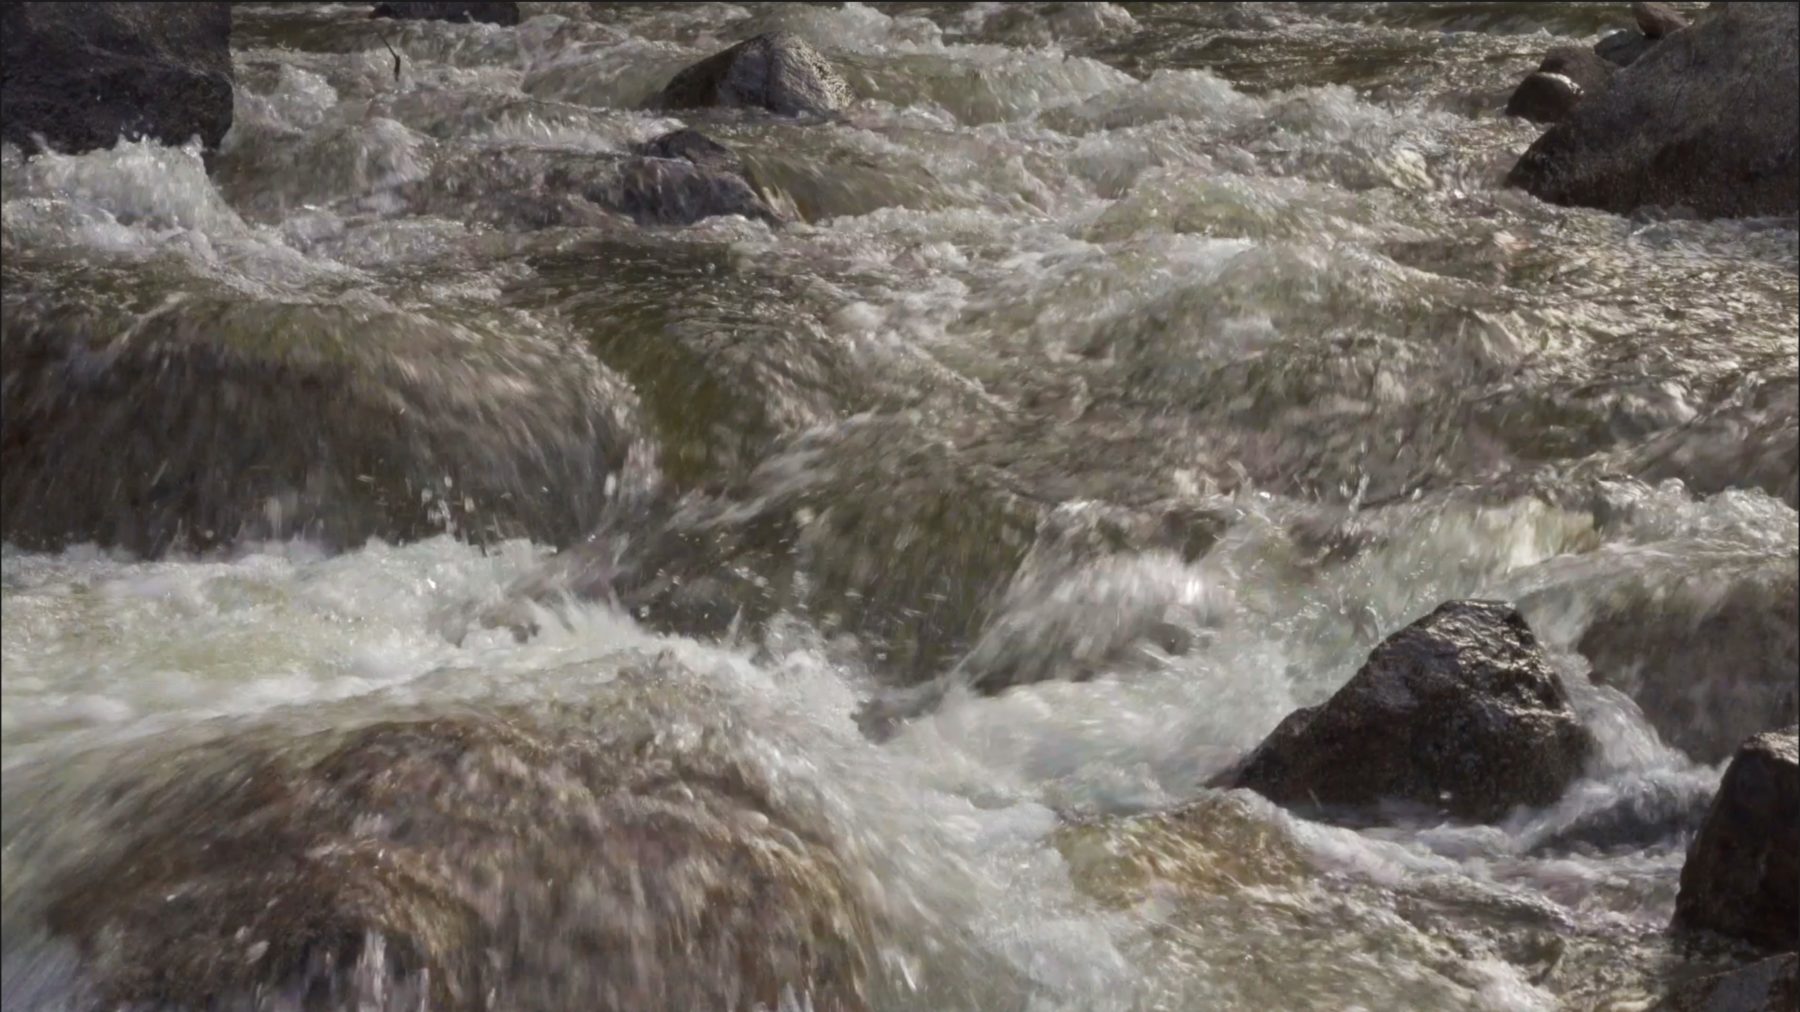 Decorative background of water rushing over rocks.